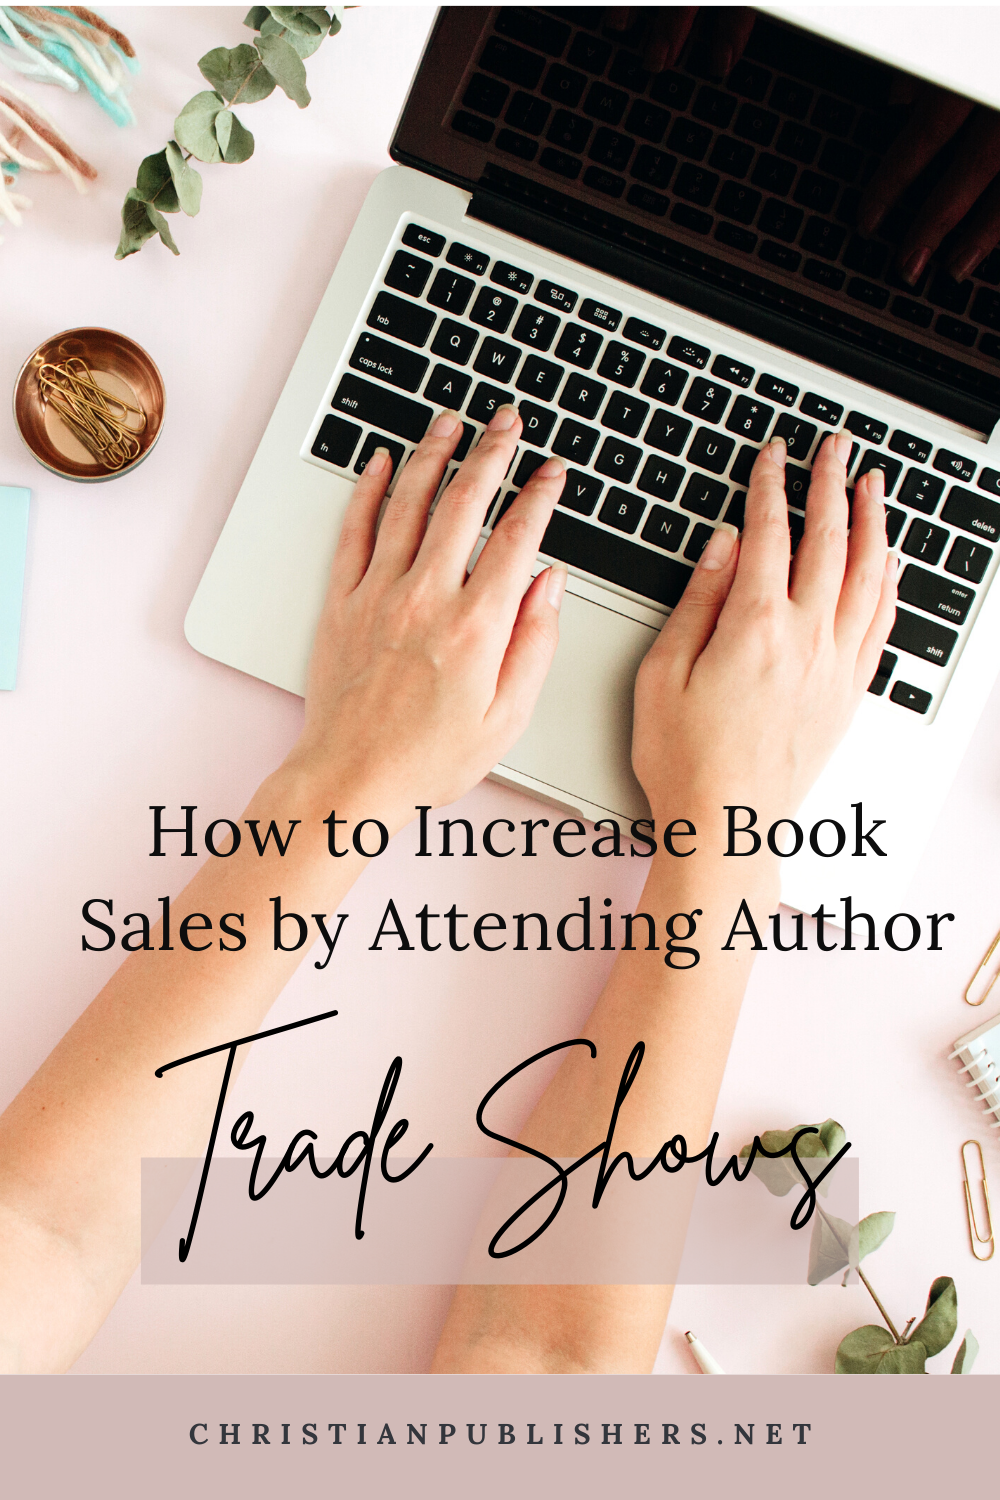 How Authors Can Get the Most Out of Trade Shows